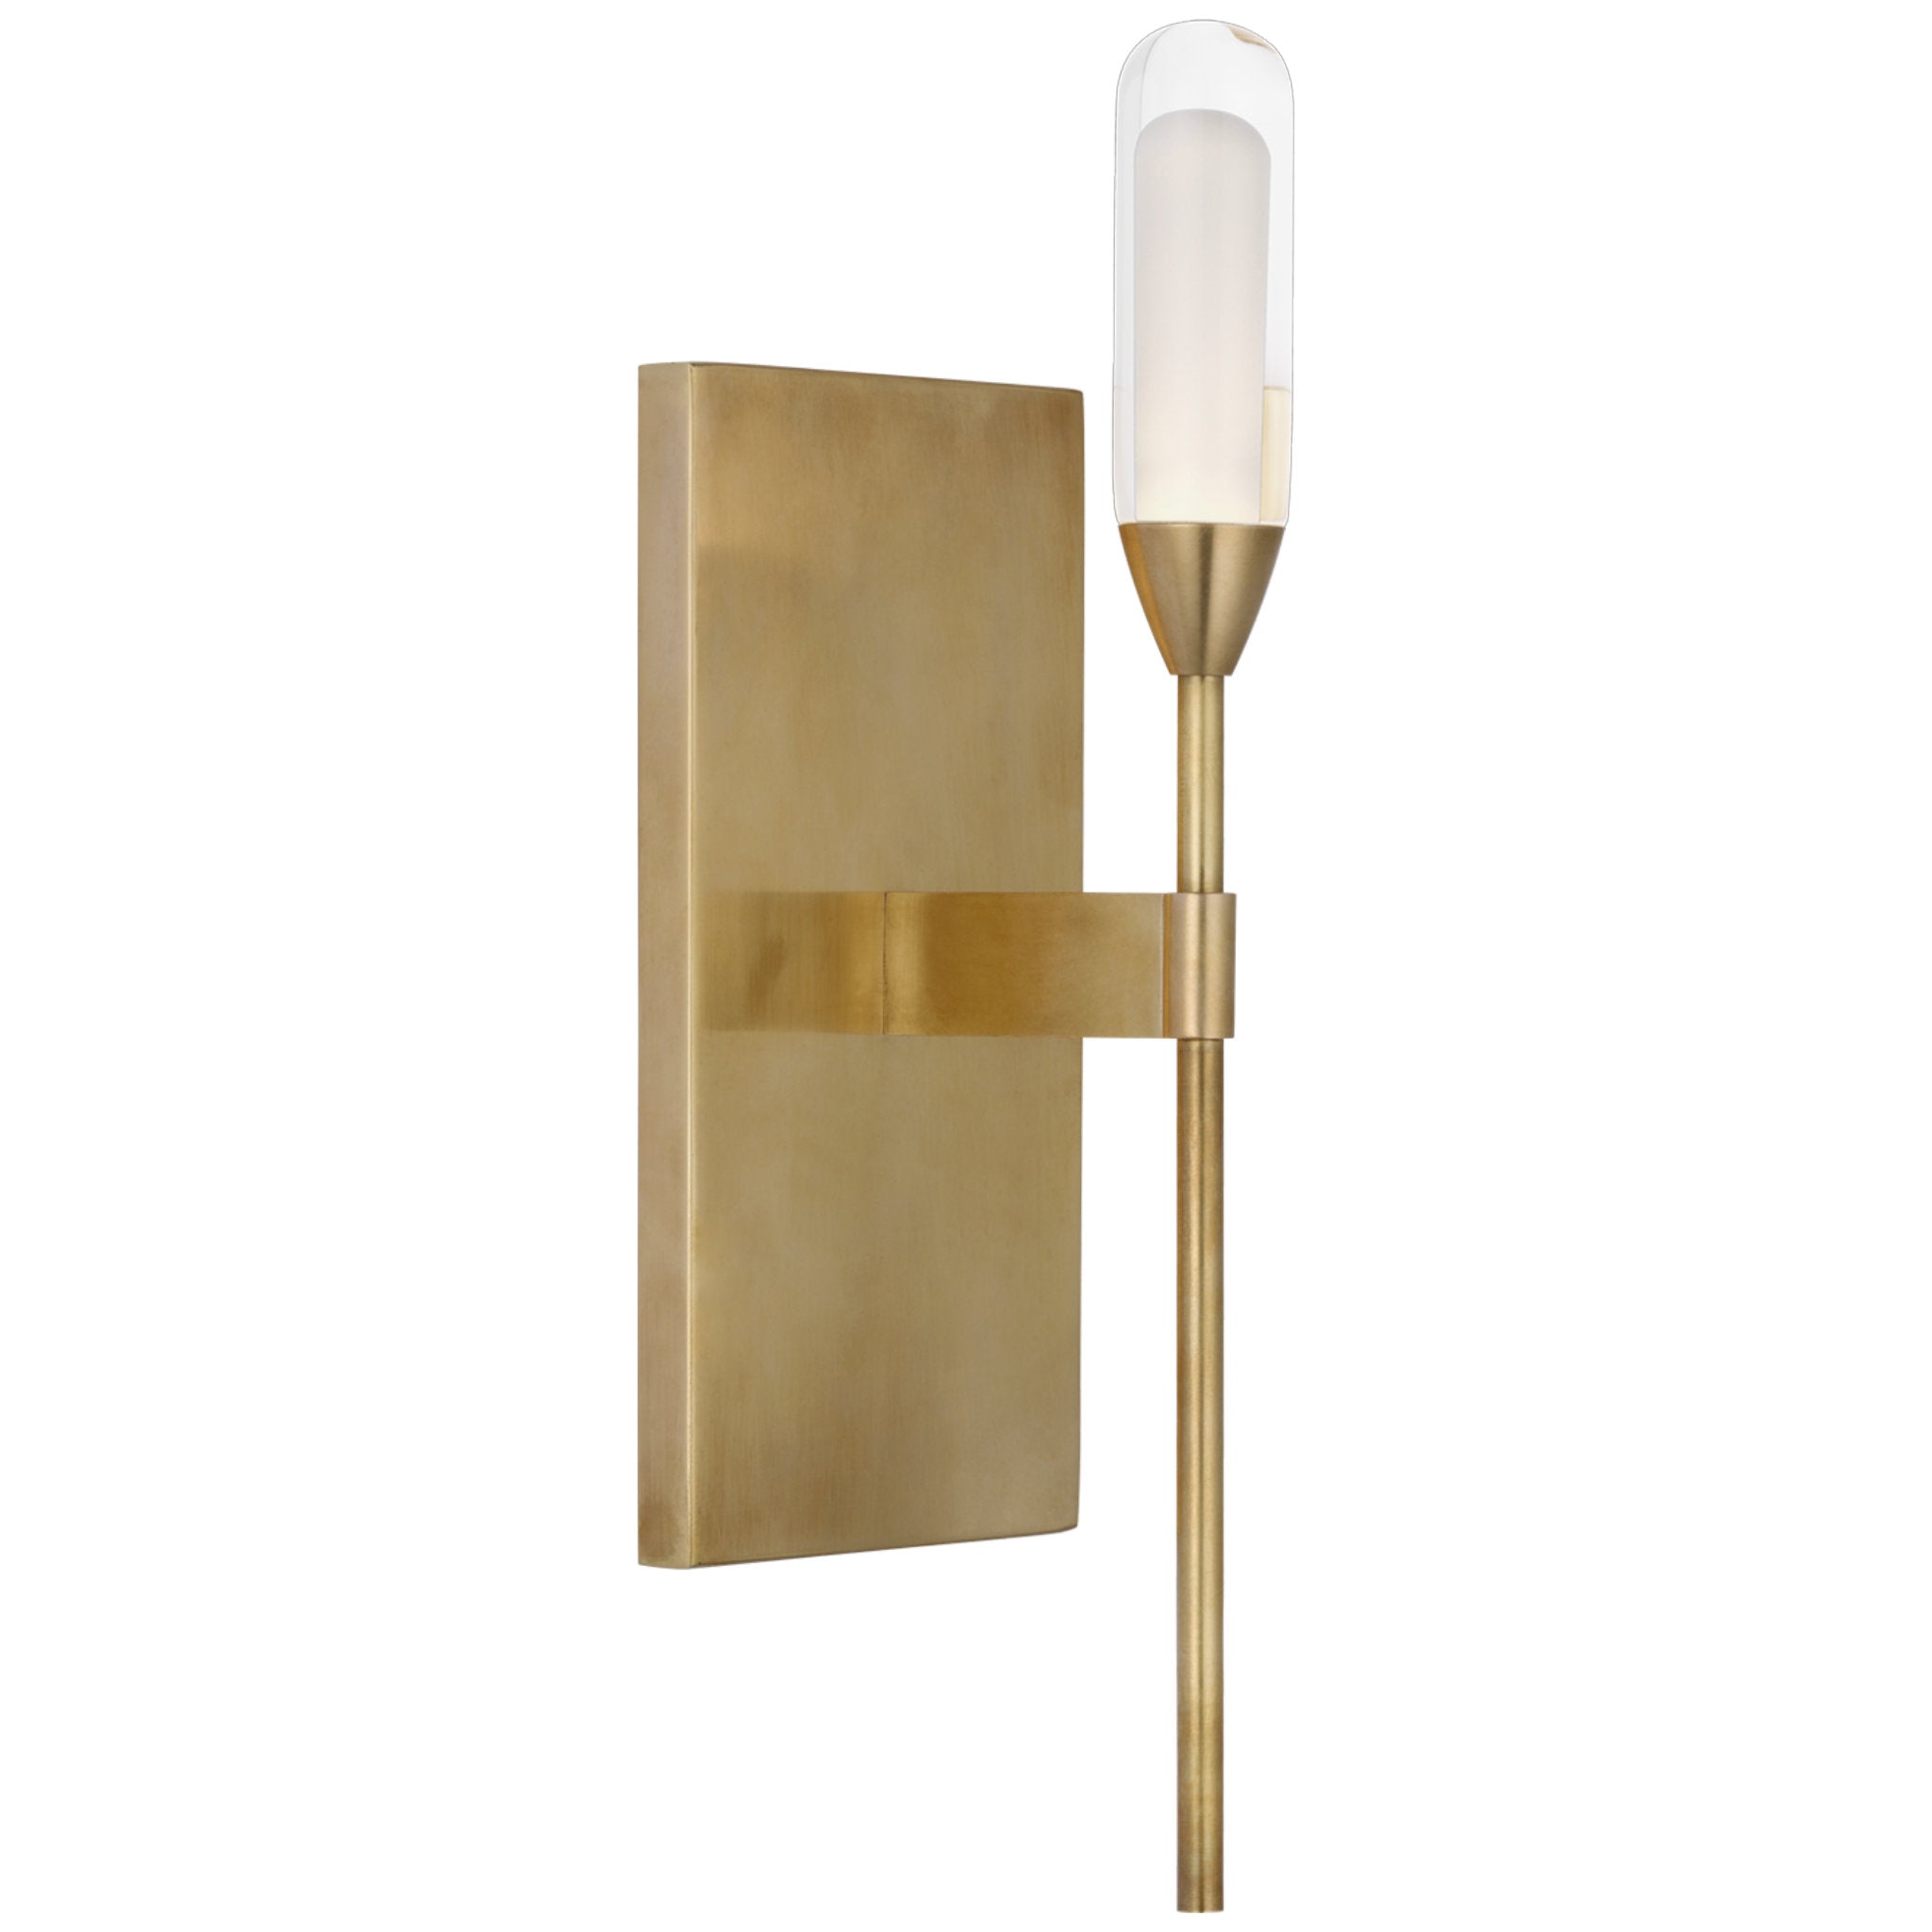 Peter Bristol Overture Medium Sconce in Natural Brass with Clear Glass